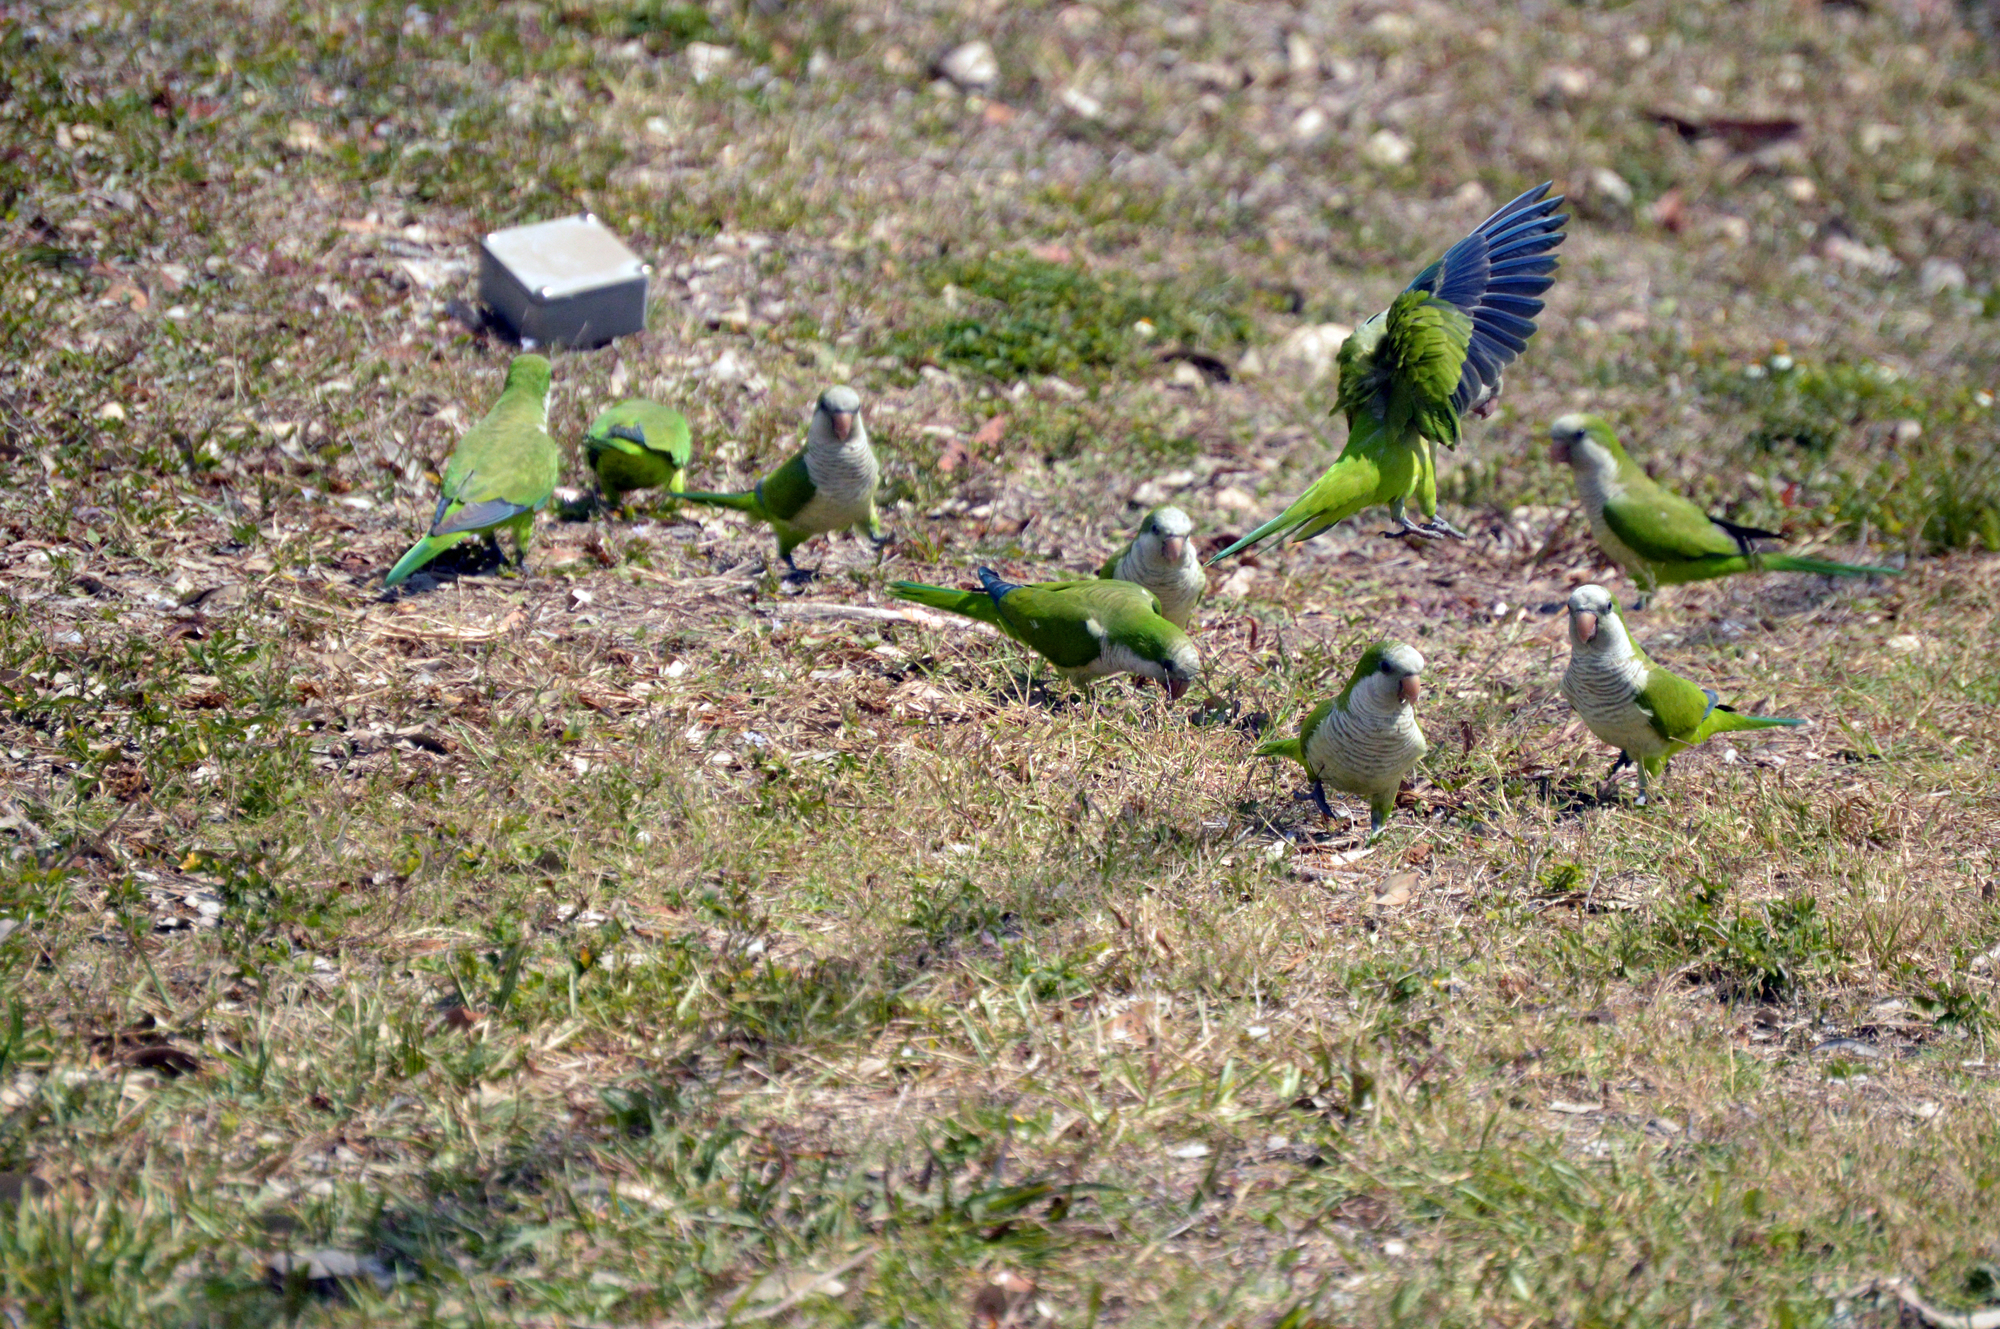 The monk parakeets, also known as quaker parrots, are not indigenous to the area.